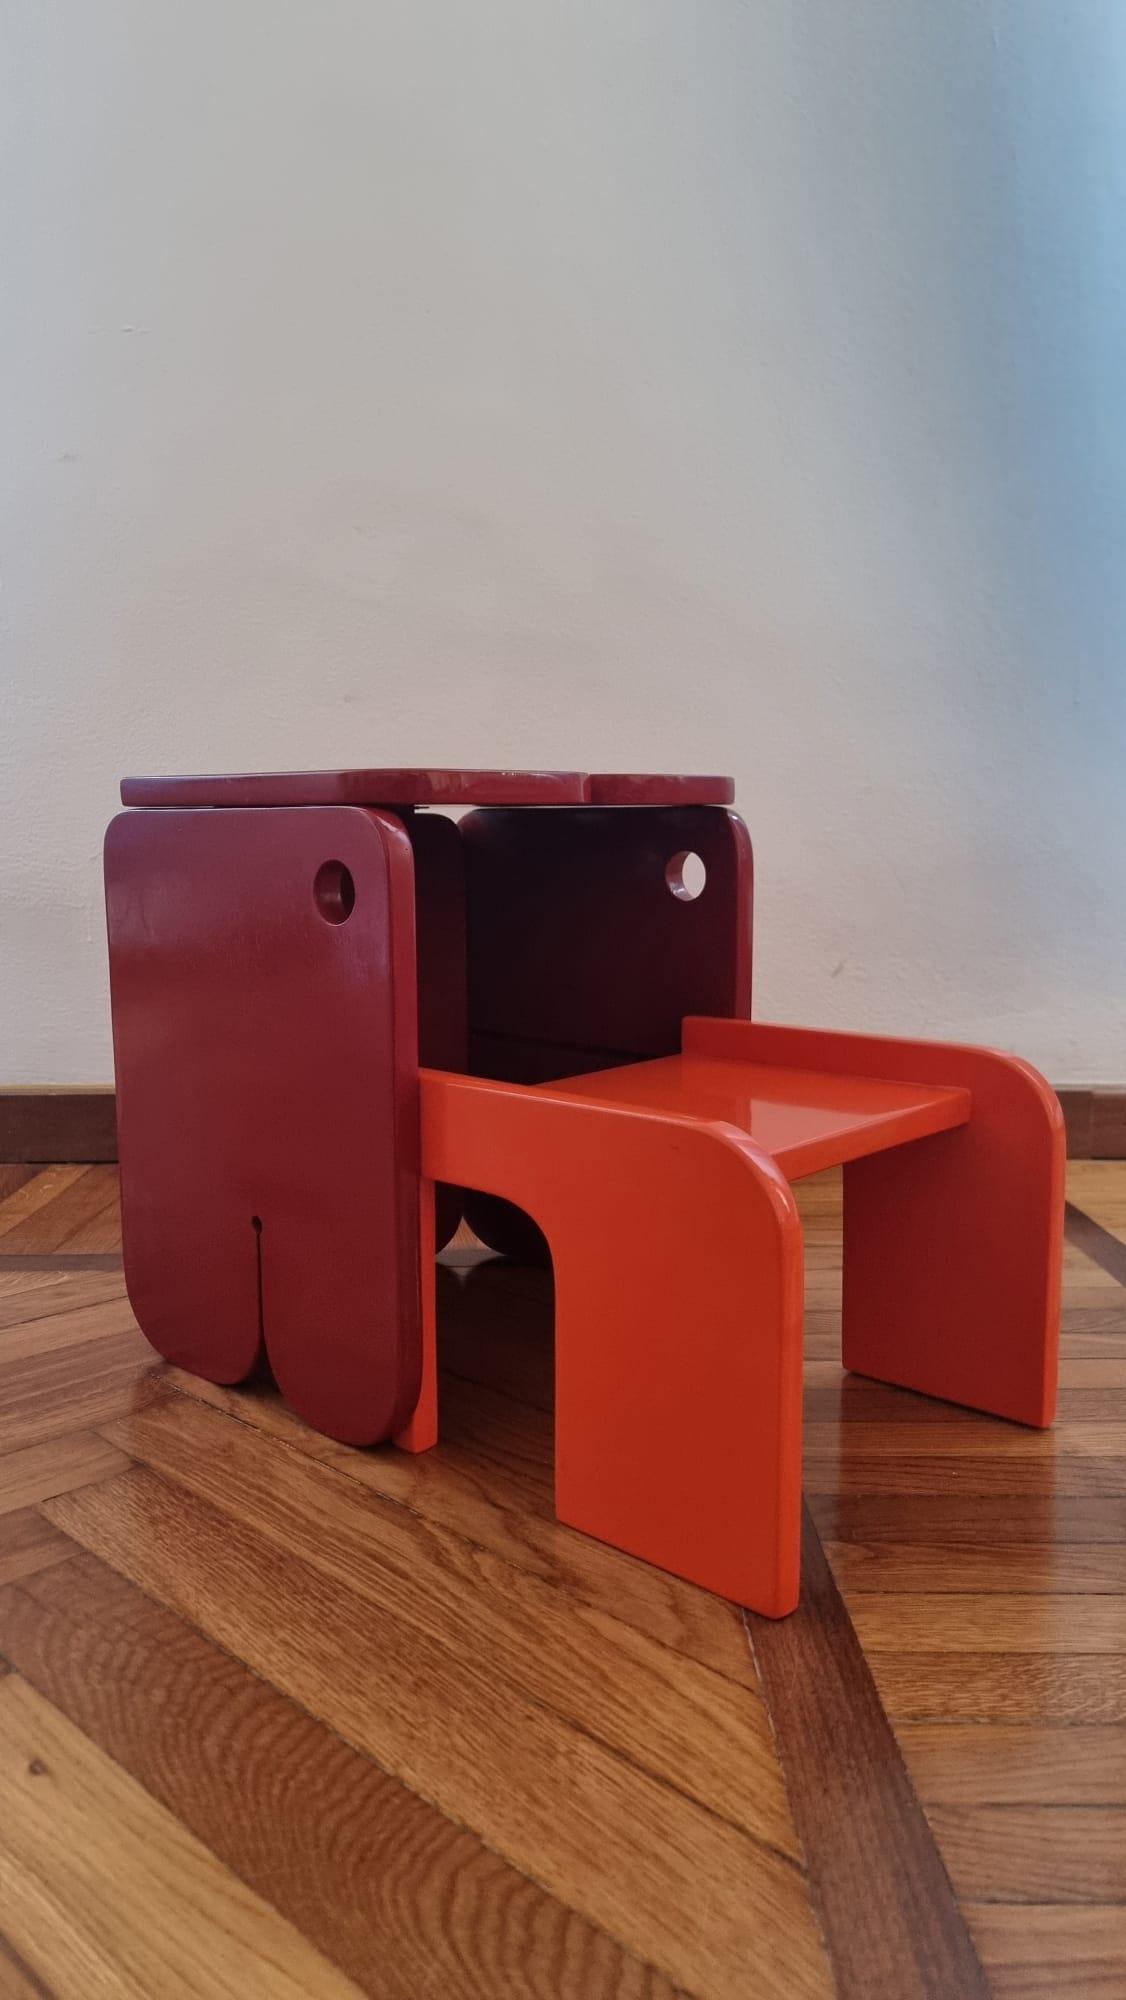 Eliofante

A chair for children
A step stool for adults

The “ELIOFANTE” was conceived upon invitation from the design studio Objects Of Common Interest and Art Athina - the annual international contemporary art fair in Athens, Greece - with the